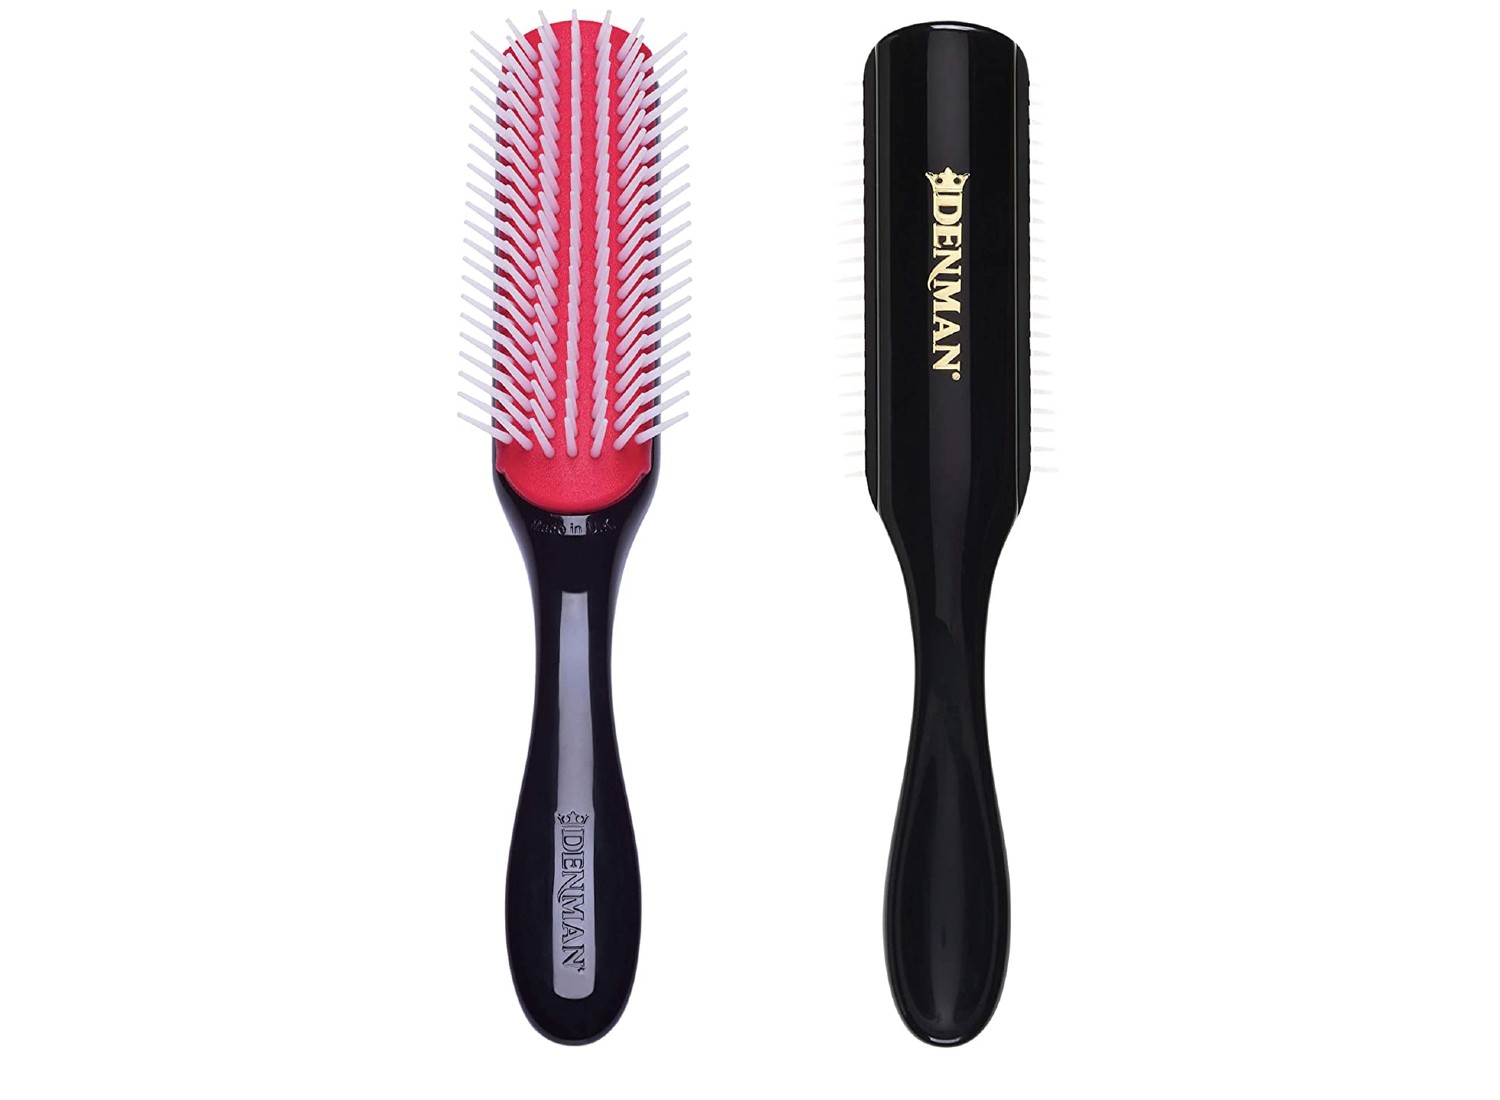 Red and black hairbrush.